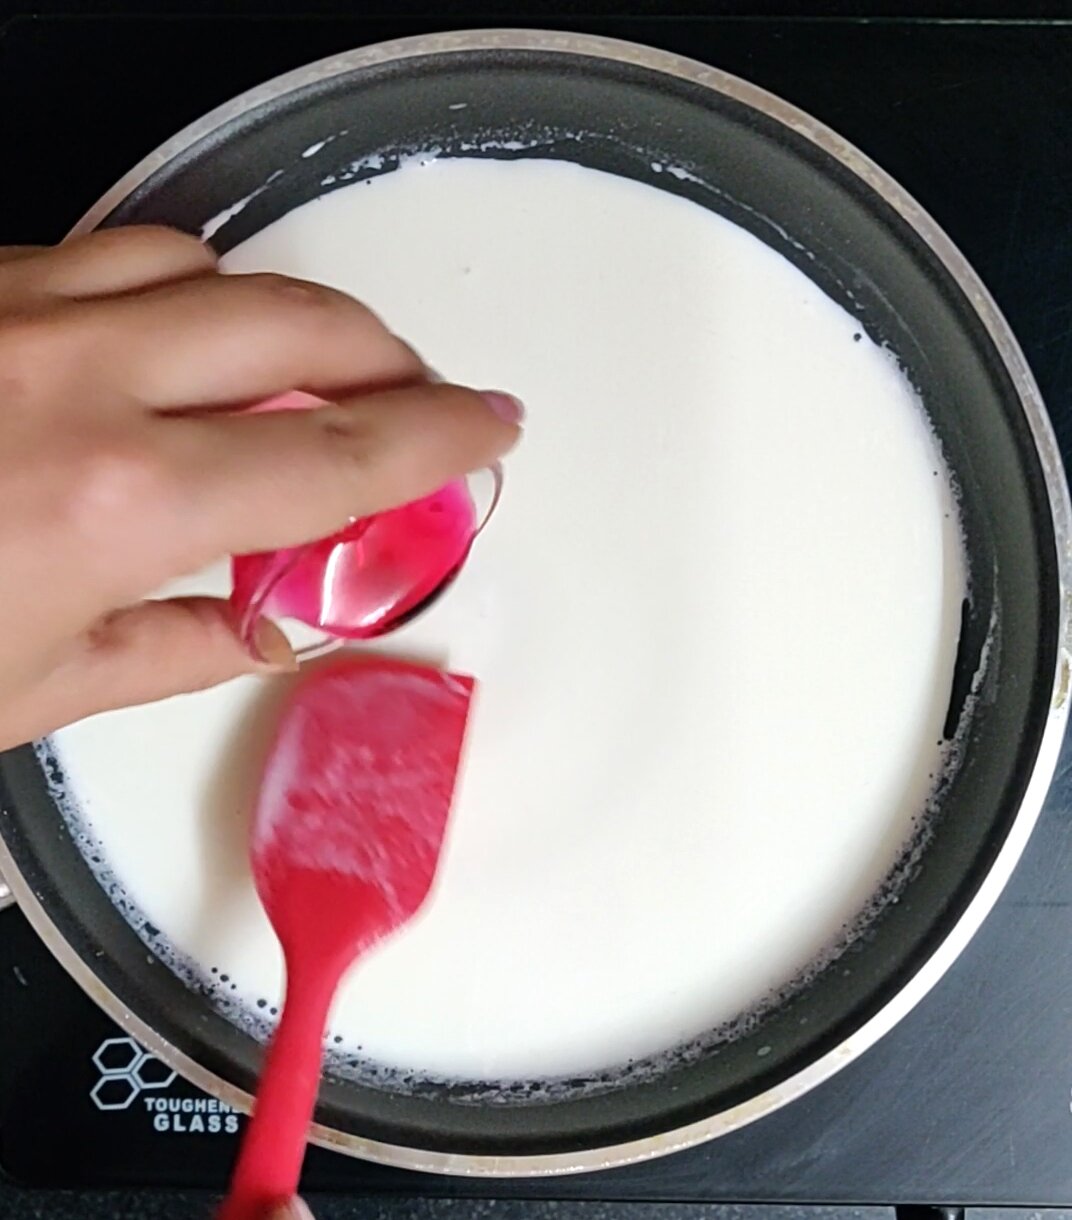 Adding rose syrup to the heated milk.